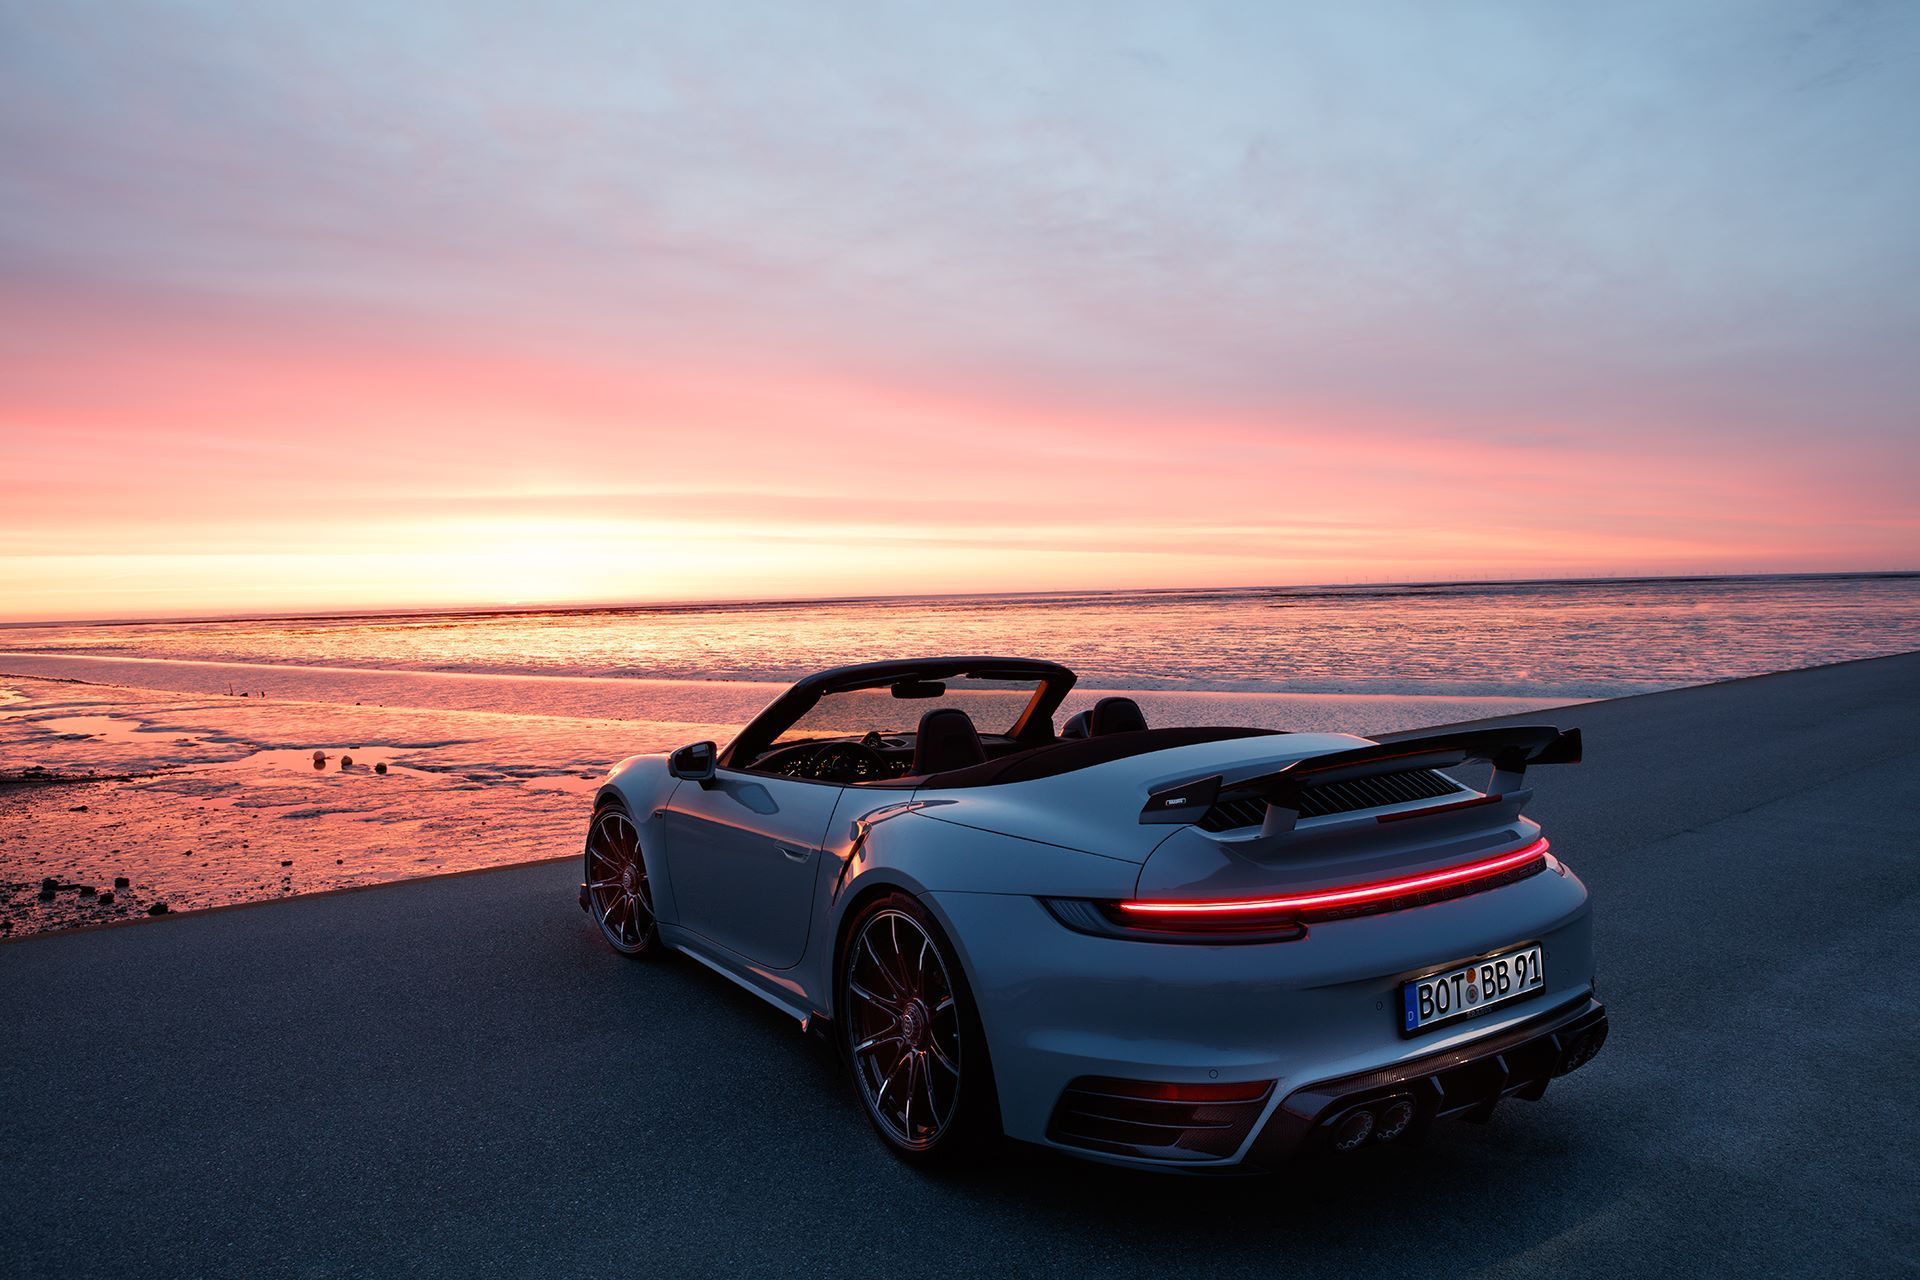 BRABUS-820-based-on-911-Turbo-S-Cabriolet-Outdoor-43